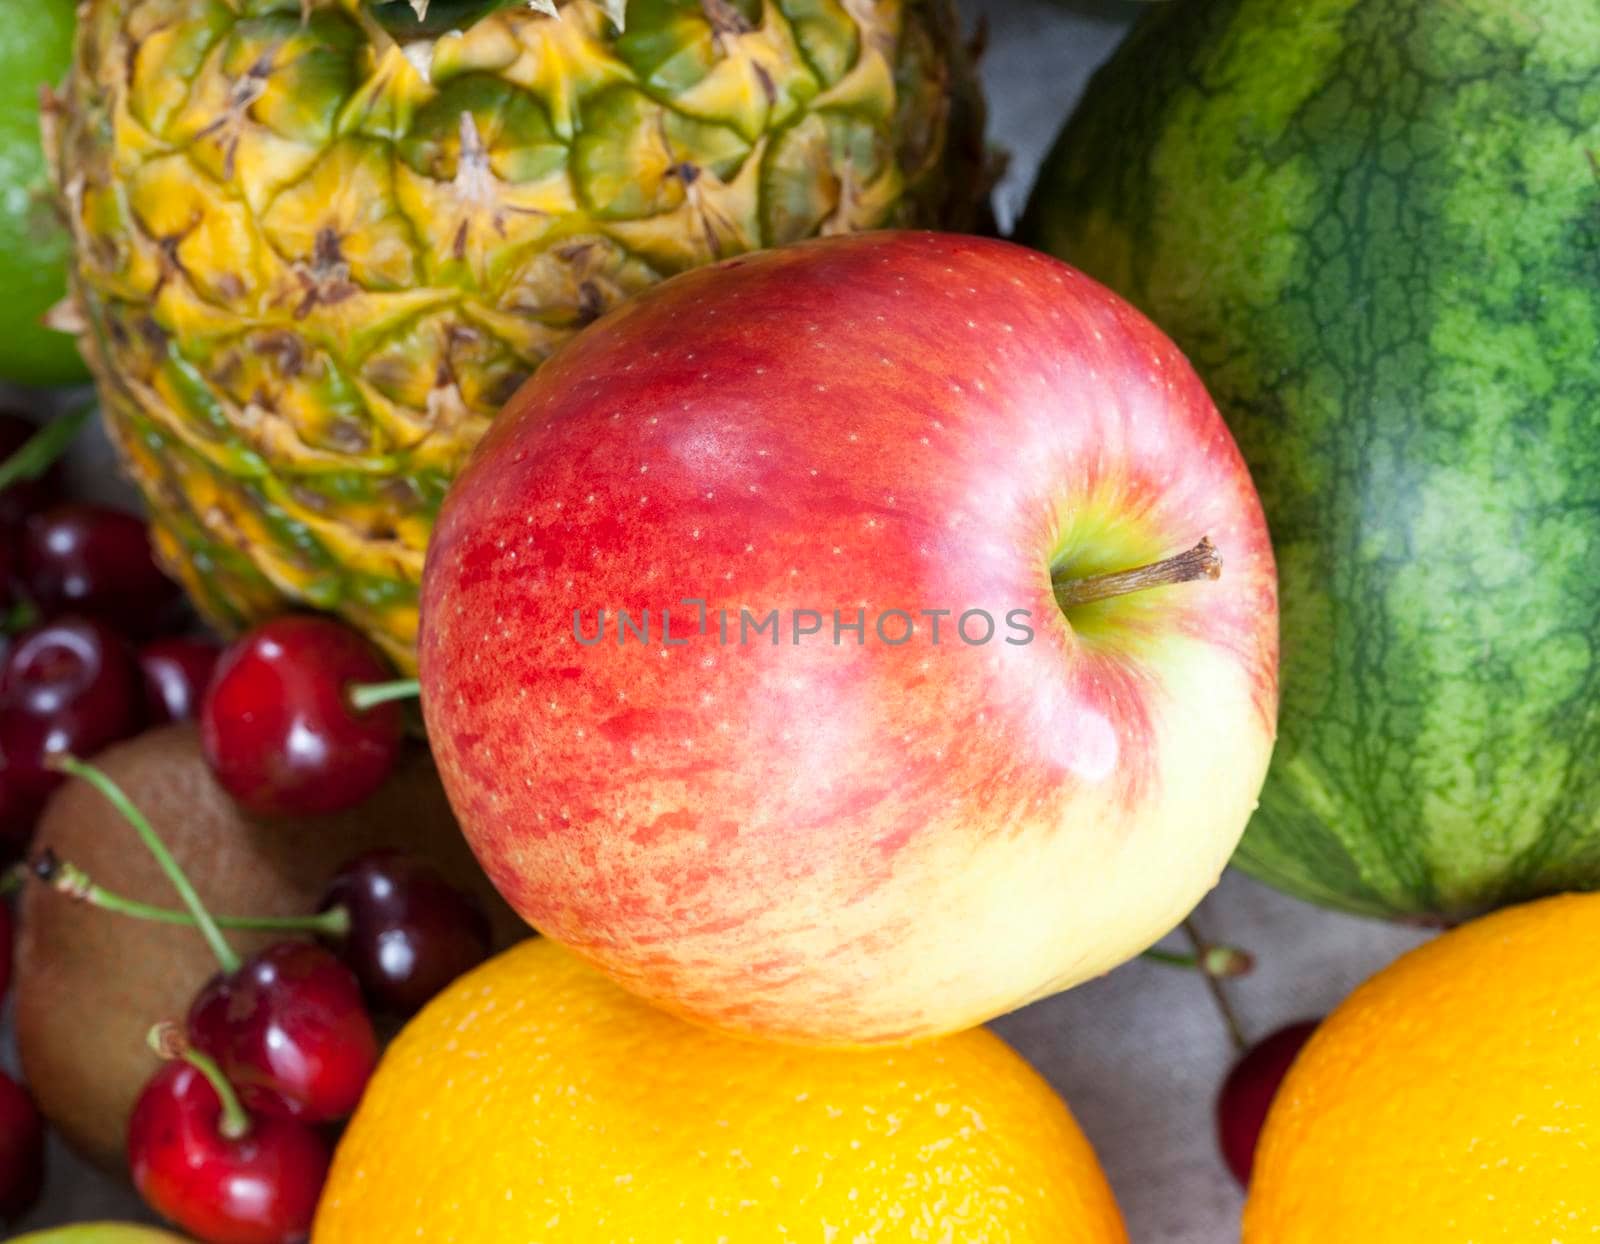 pineapple, apples, oranges and other fruits and berries closeup, photo of natural food